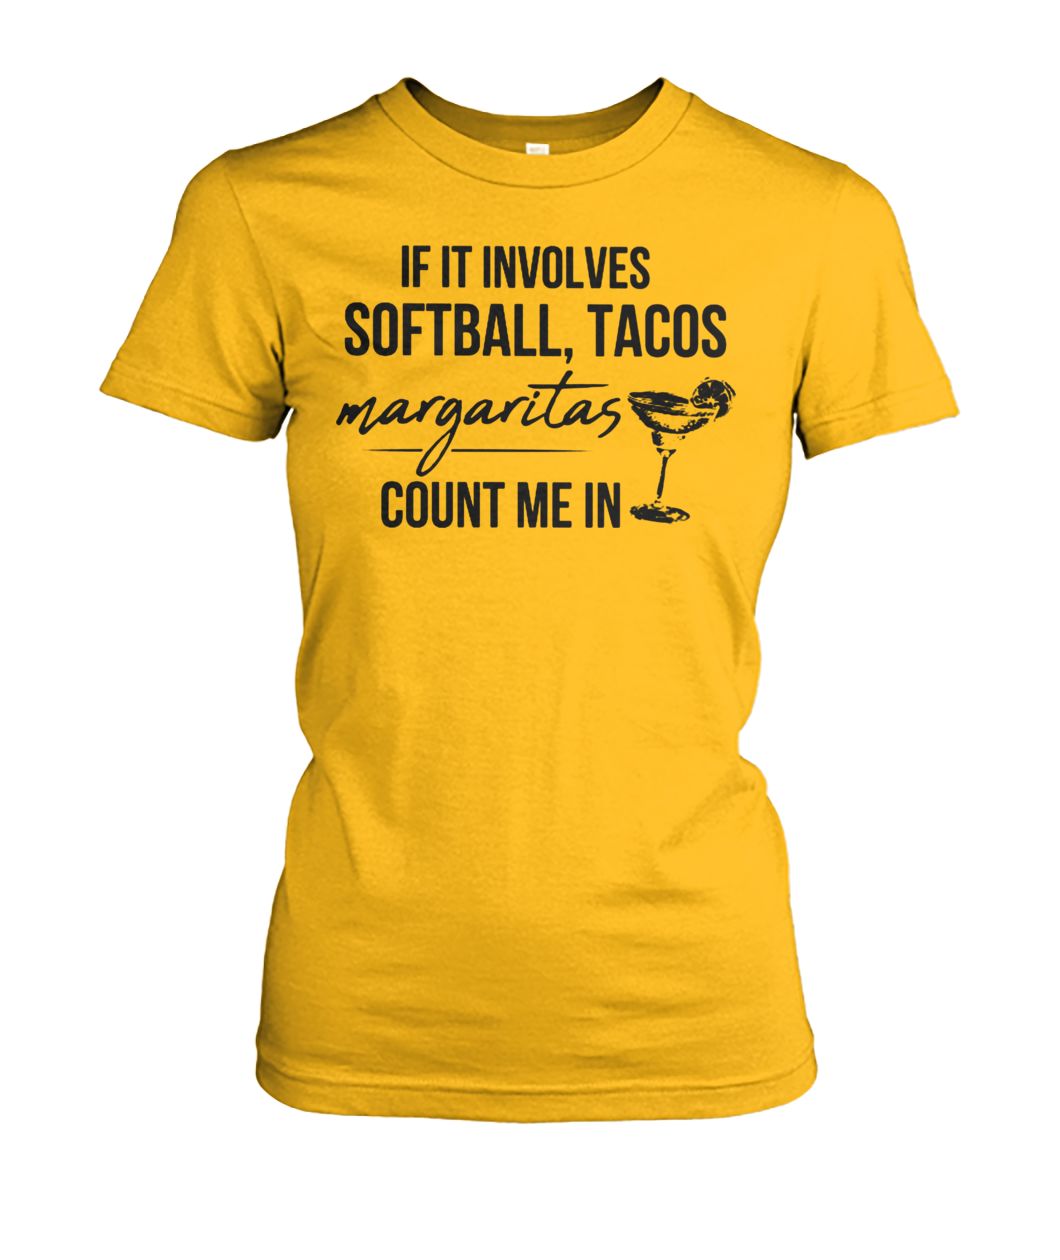 If it involves softball and tacos margaritas count me in women's crew tee